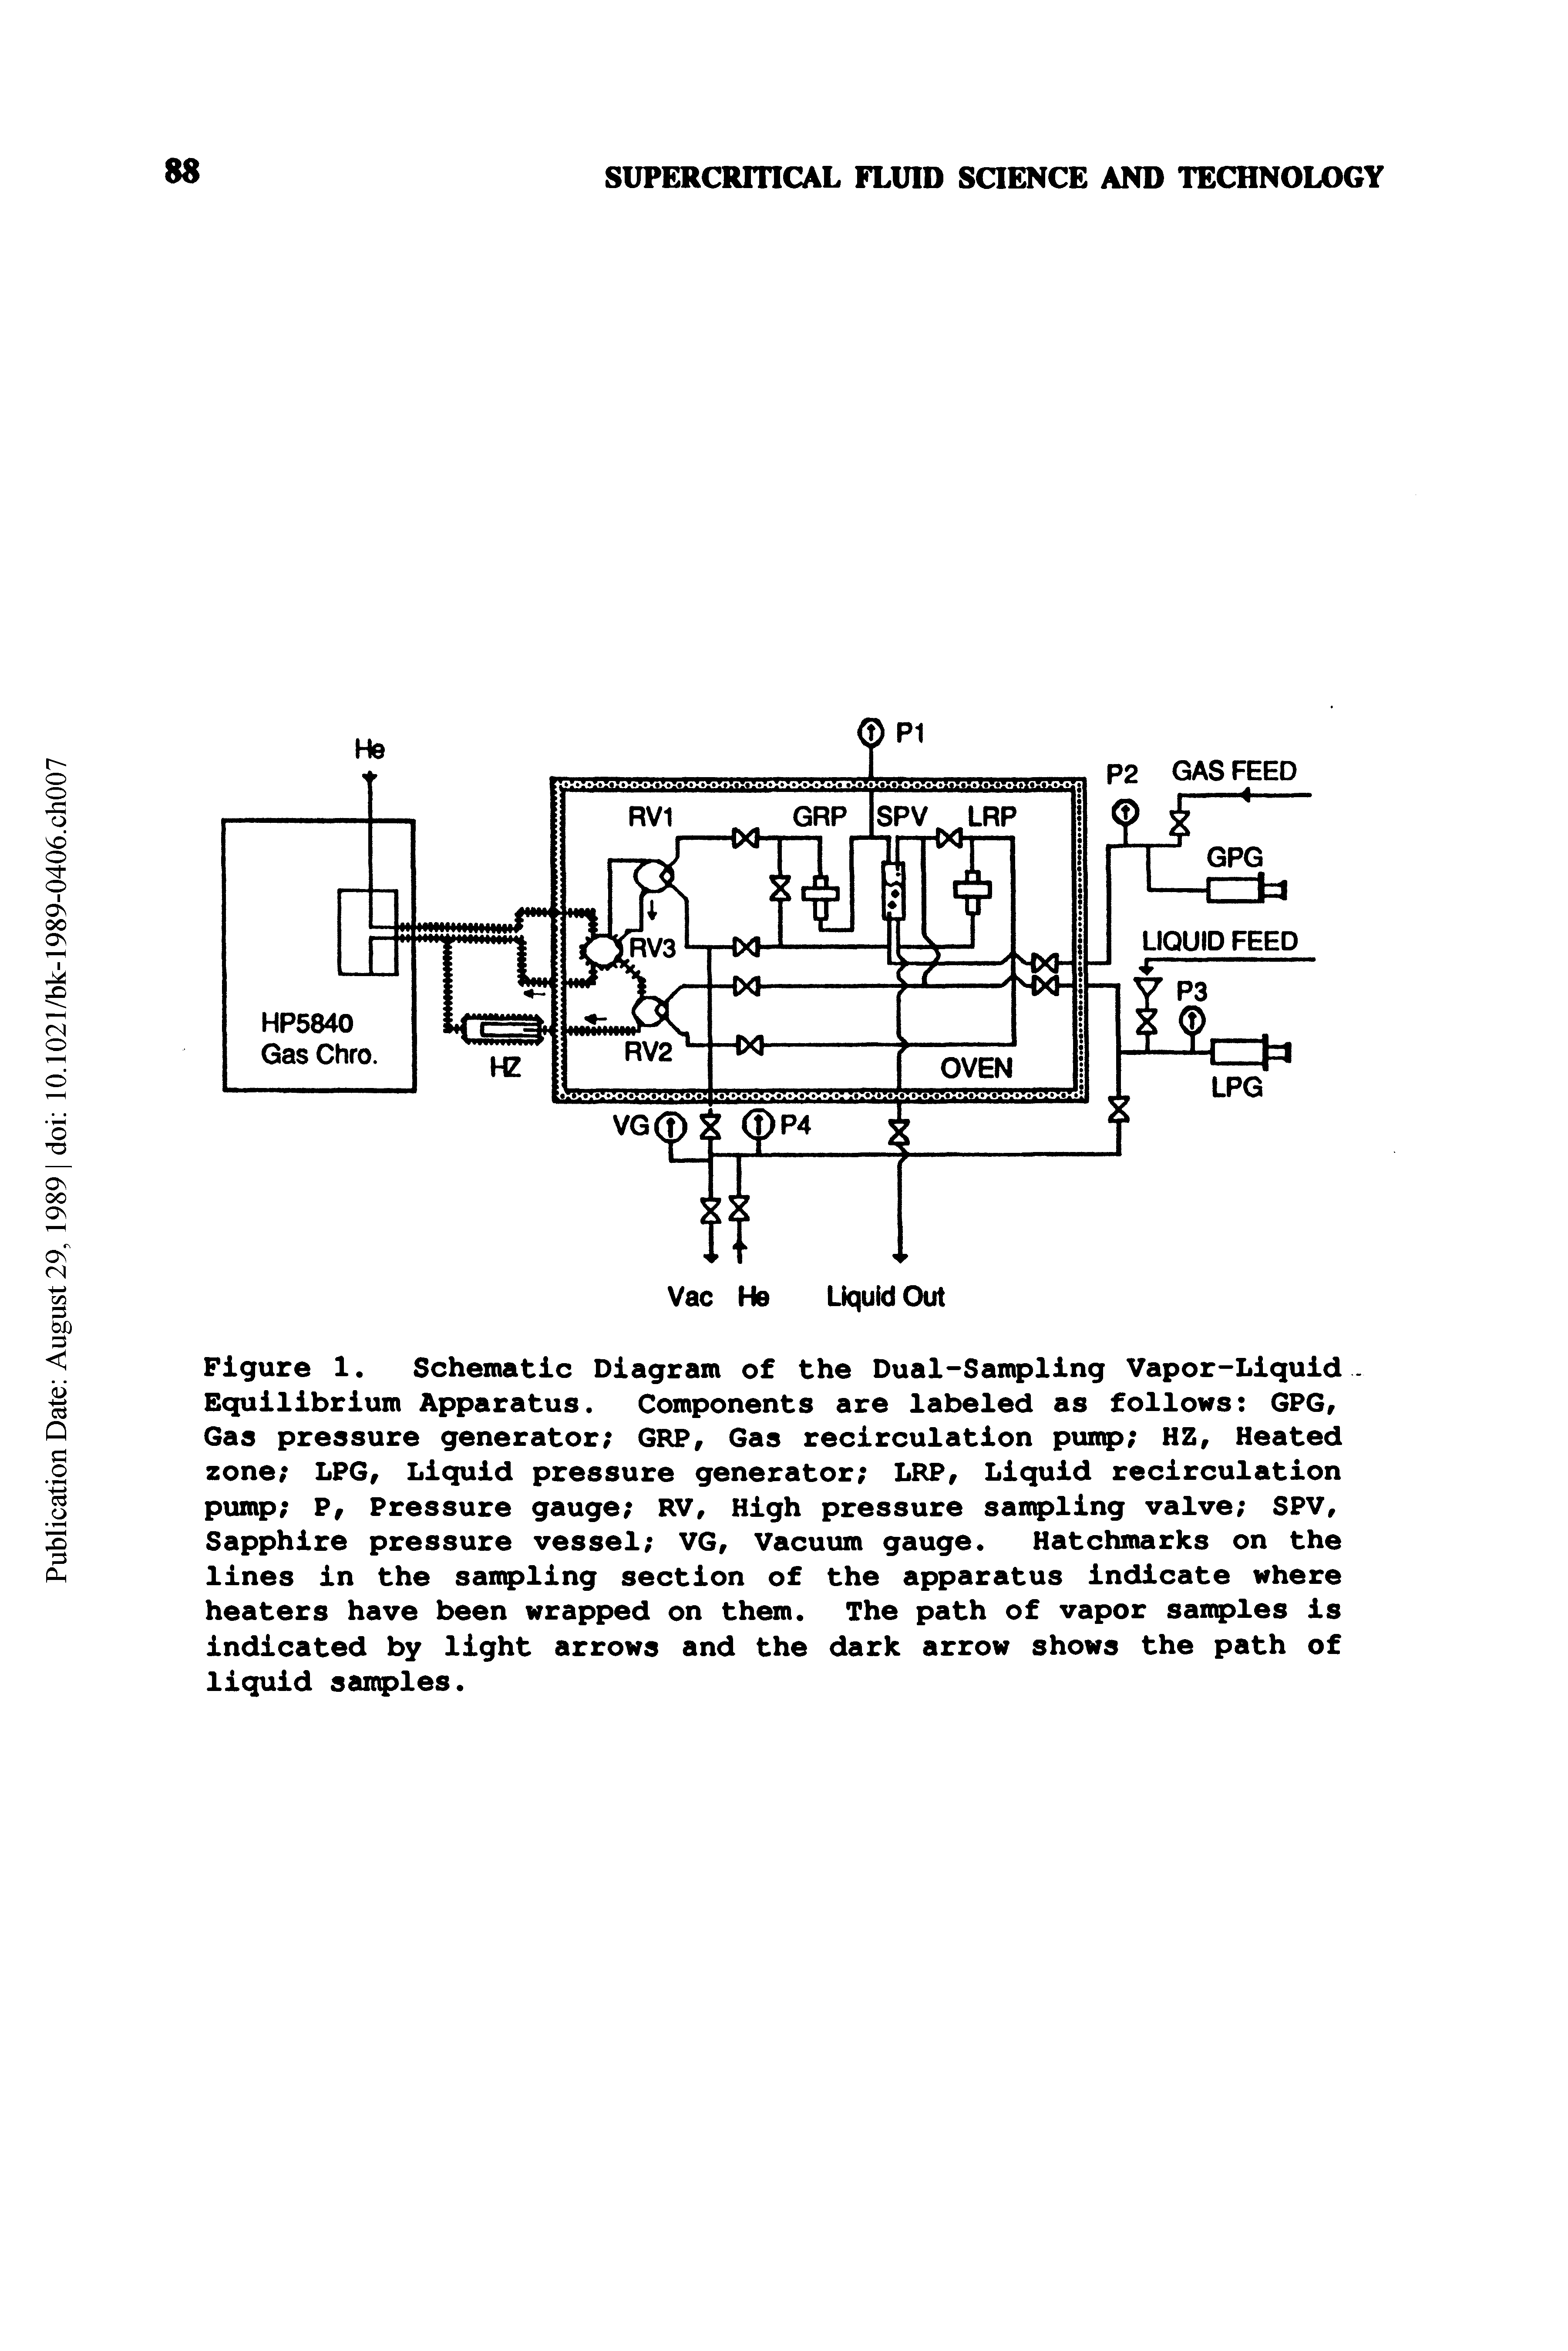 Figure 1. Schematic Diagram of the Dual-Sampling Vapor-Liquid Equilibrium Apparatus. Components are labeled as follows 6PG, Gas pressure generator GRP, Gas recirculation punqp HZ, Heated zone LPG, Liquid pressure generator LRP, Liquid recirculation pump P, Pressure gauge RV, High pressure sanqpling valve SPV, Sapphire pressure vessel VG, Vacuum gauge. Hatchmarks on the lines in the saxtqpling section of the apparatus indicate where heaters have been wrapped on them. The path of vapor saxtqples is indicated by light arrows and the dark arrow shows the path of liquid sanples.